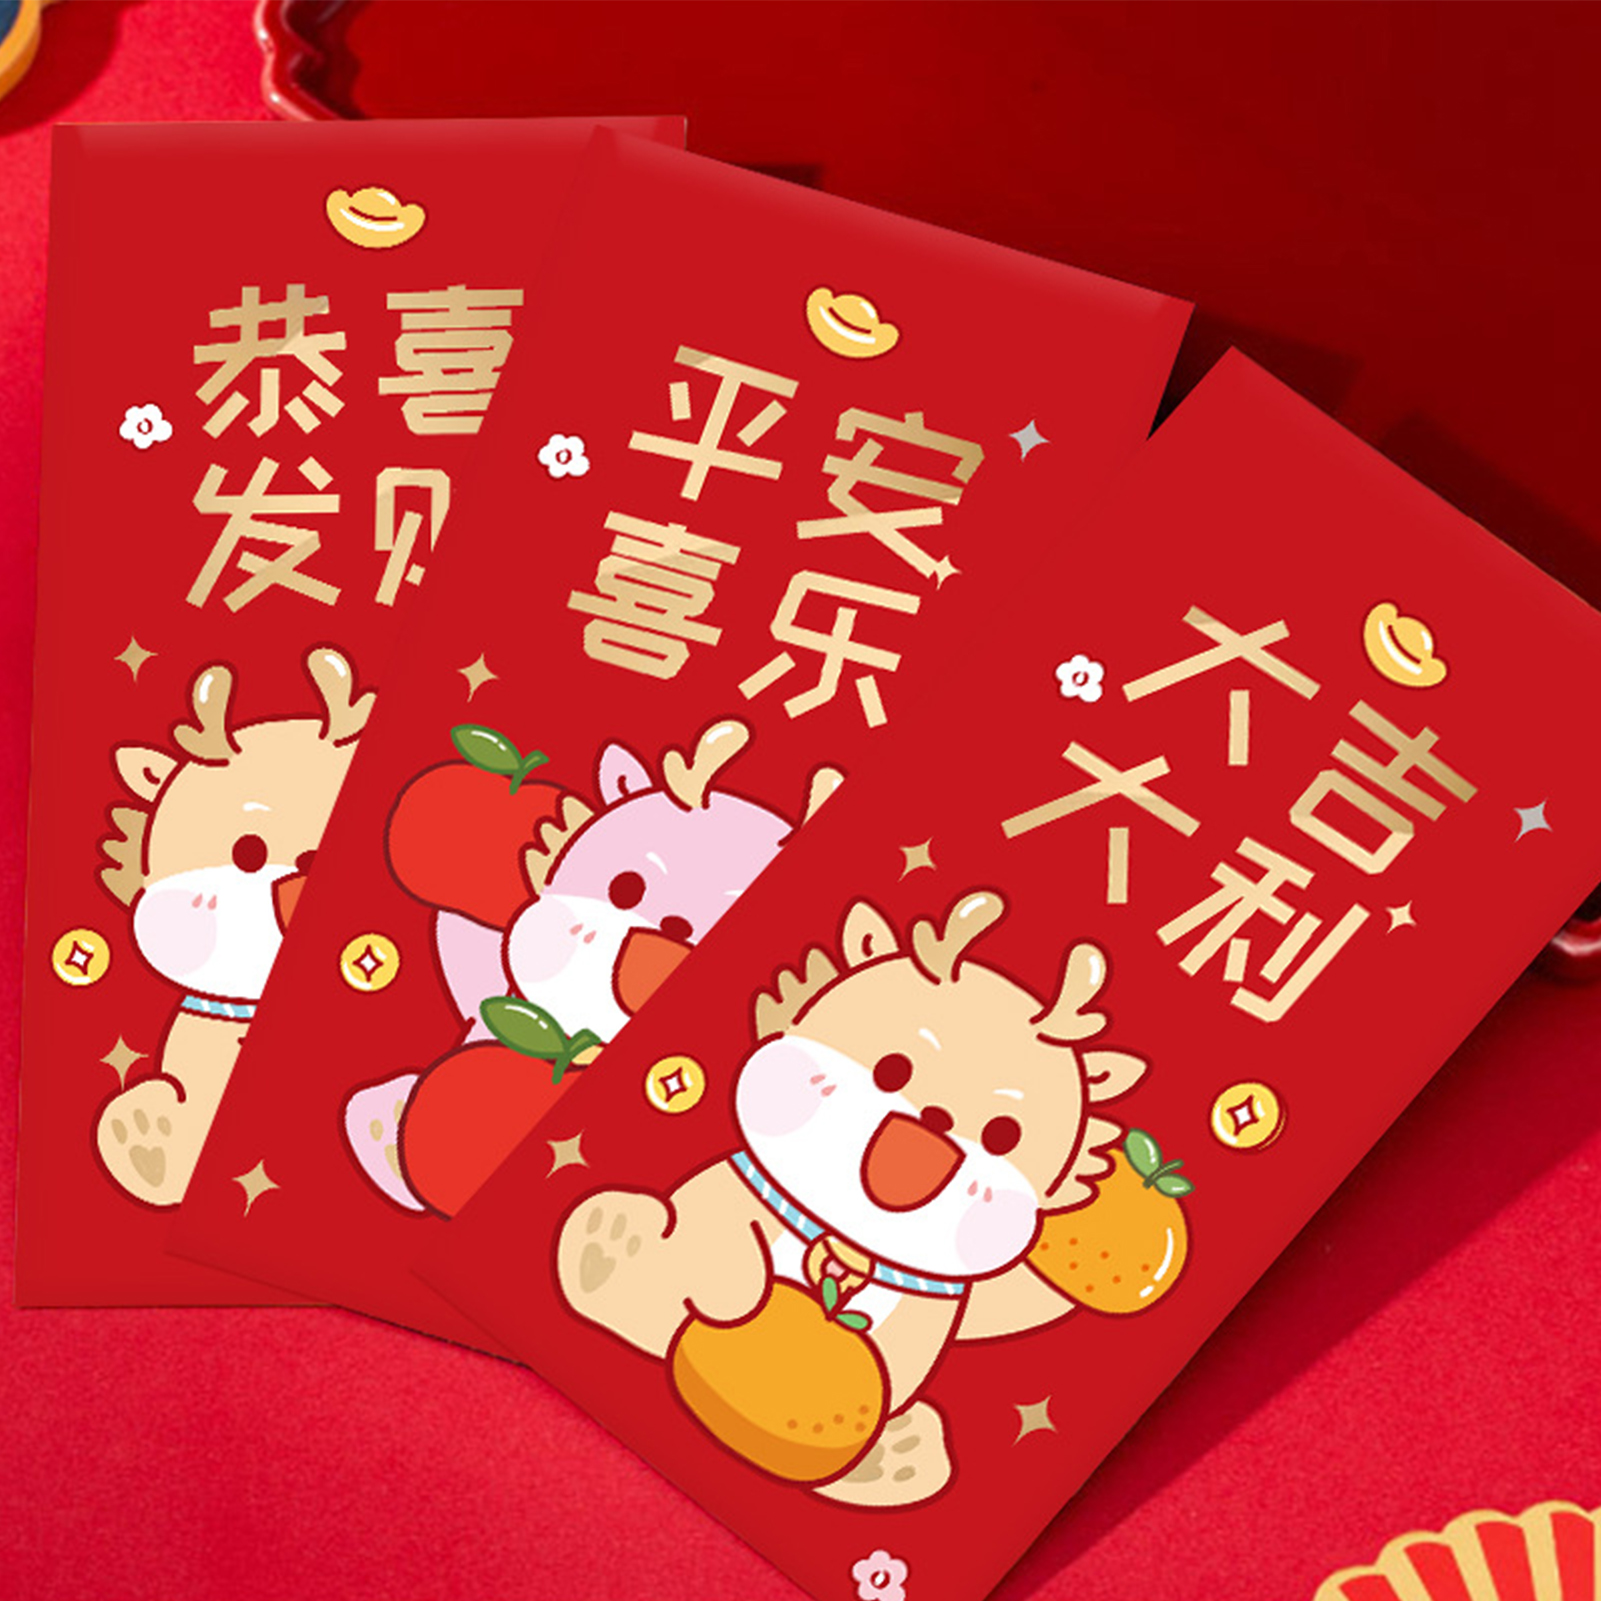 Red Envelope Clipart PNG Images, Childs Lucky Money Daji Dali Red Packet  Hand Drawn Red Envelope Illustration Big Red Envelope, Drumming Red Envelope,  Creative …